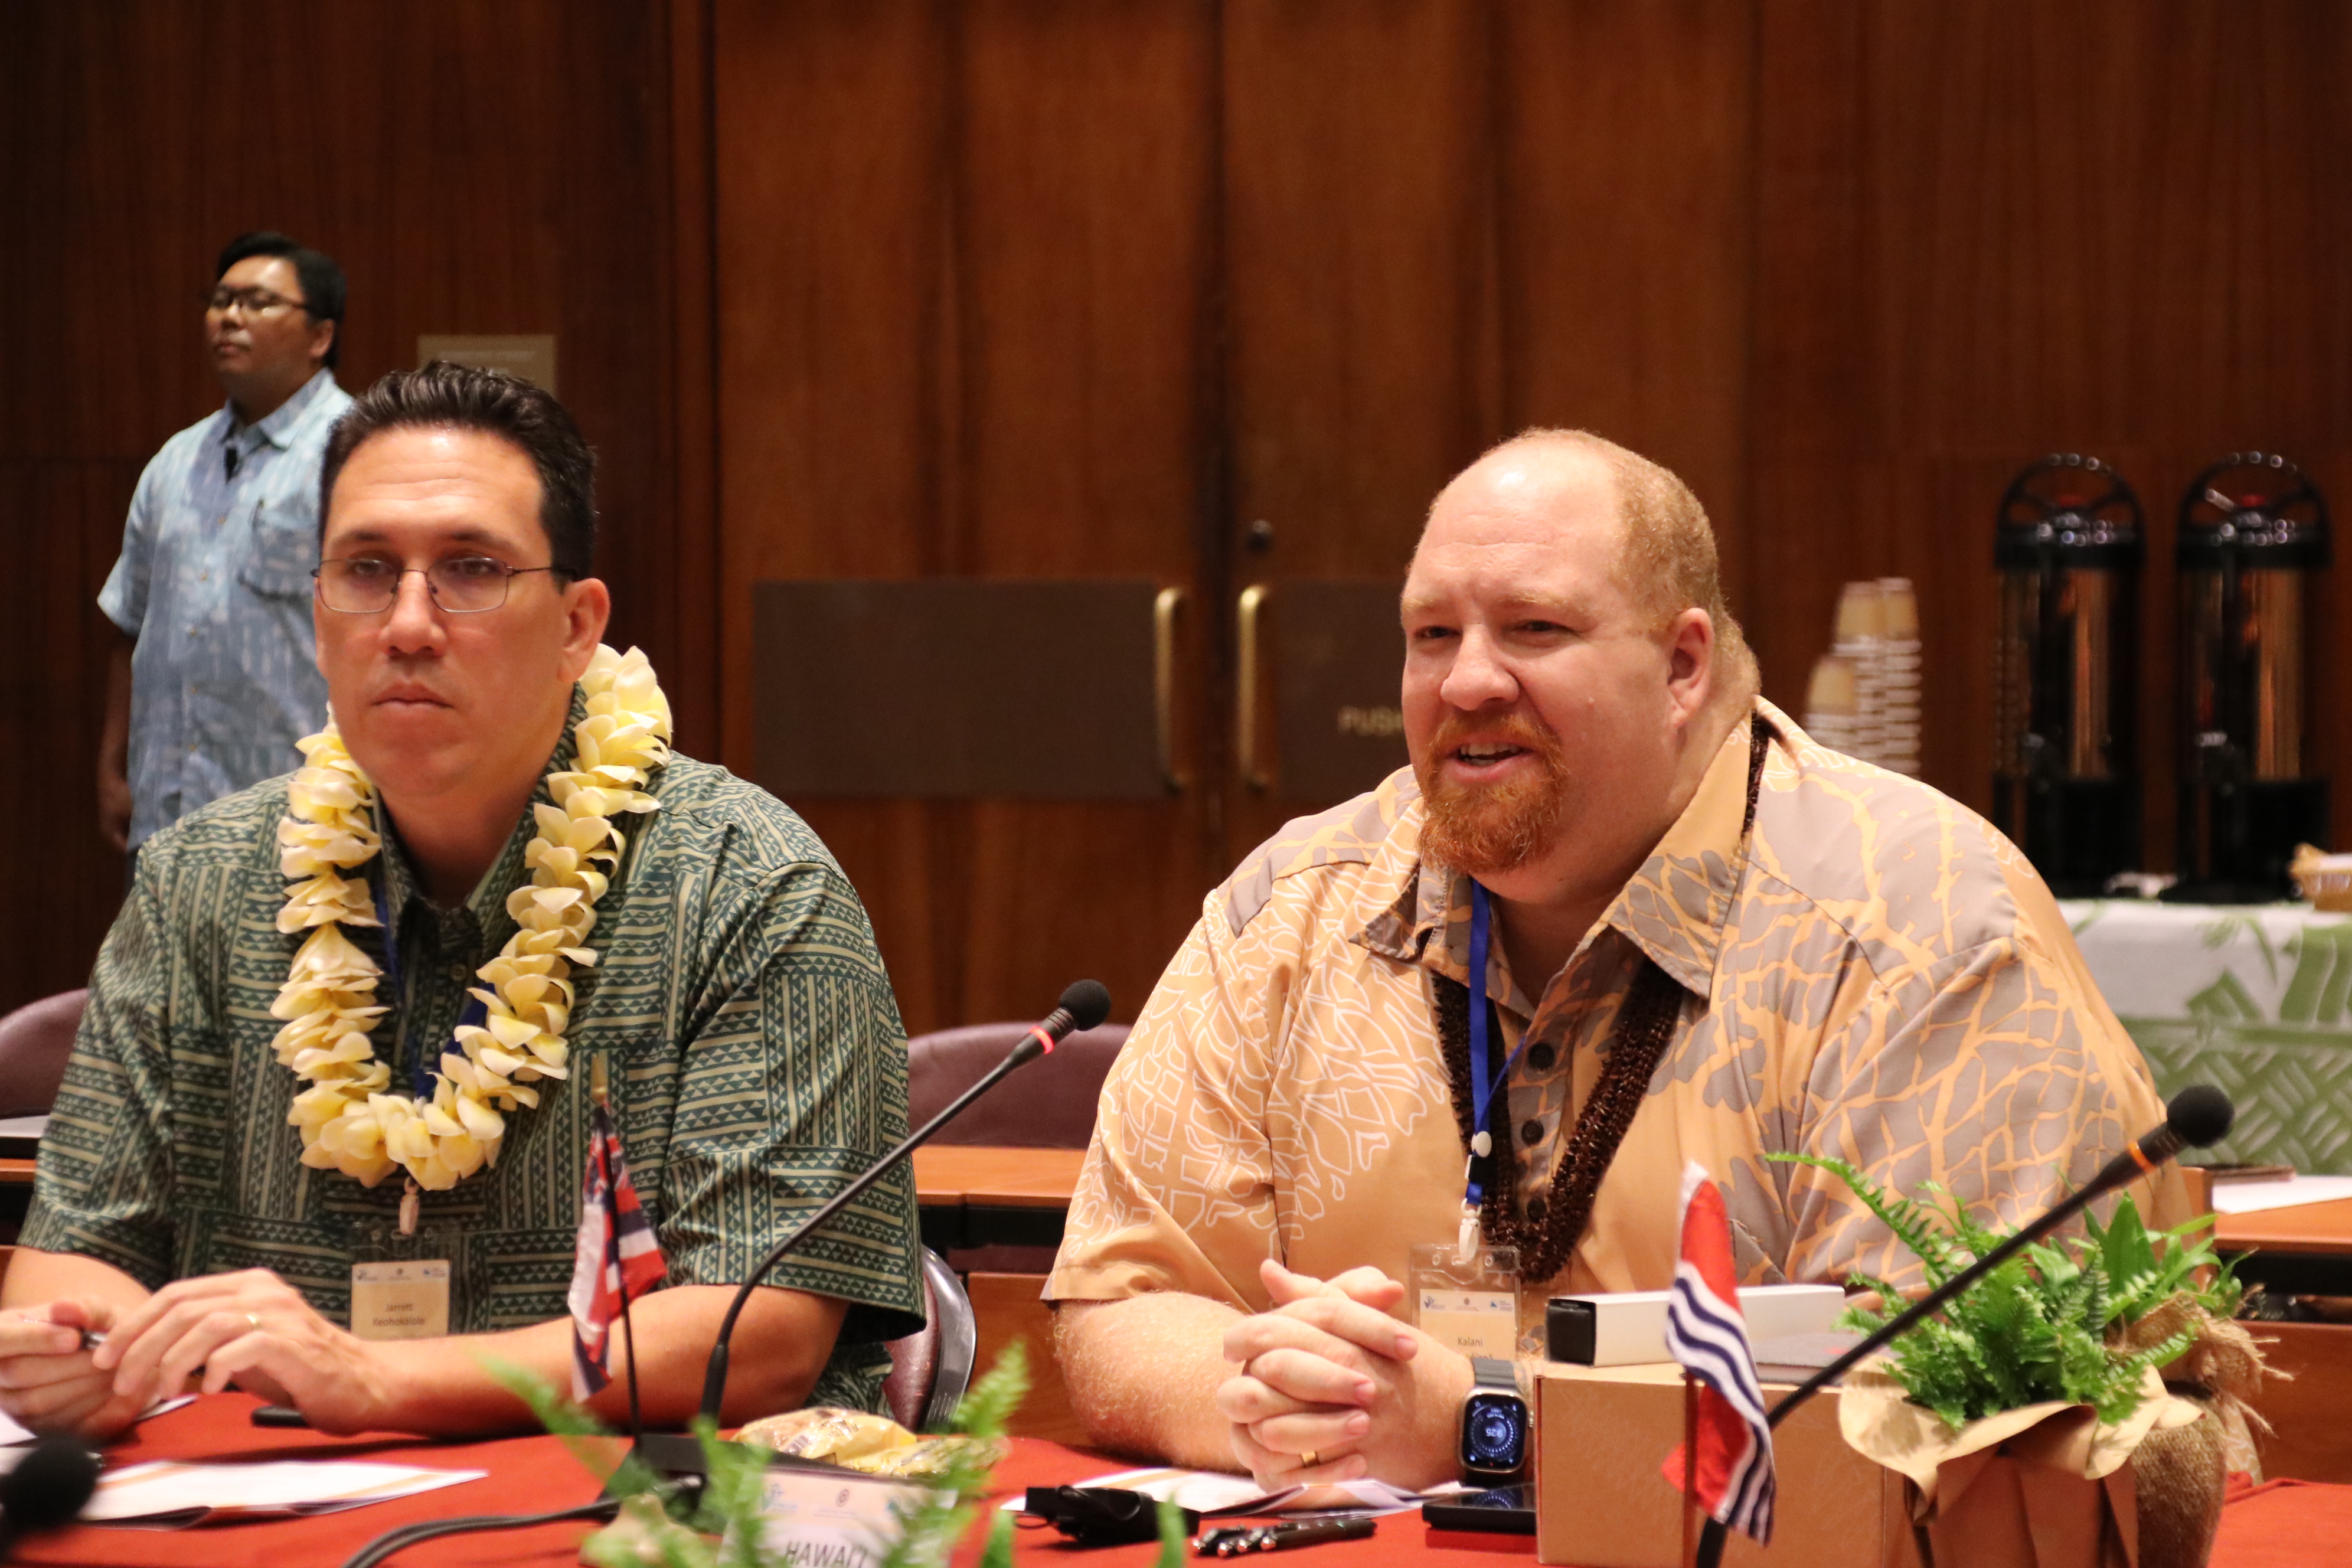 Mr Kalani L. Ka‘anā‘anā, Chair of the Hawai’i Commission for the 13th Festival of Pacific Arts & Culture has officially confirmed that the festival will be hosted by Hawai’i from 6 – 16 June 2024.